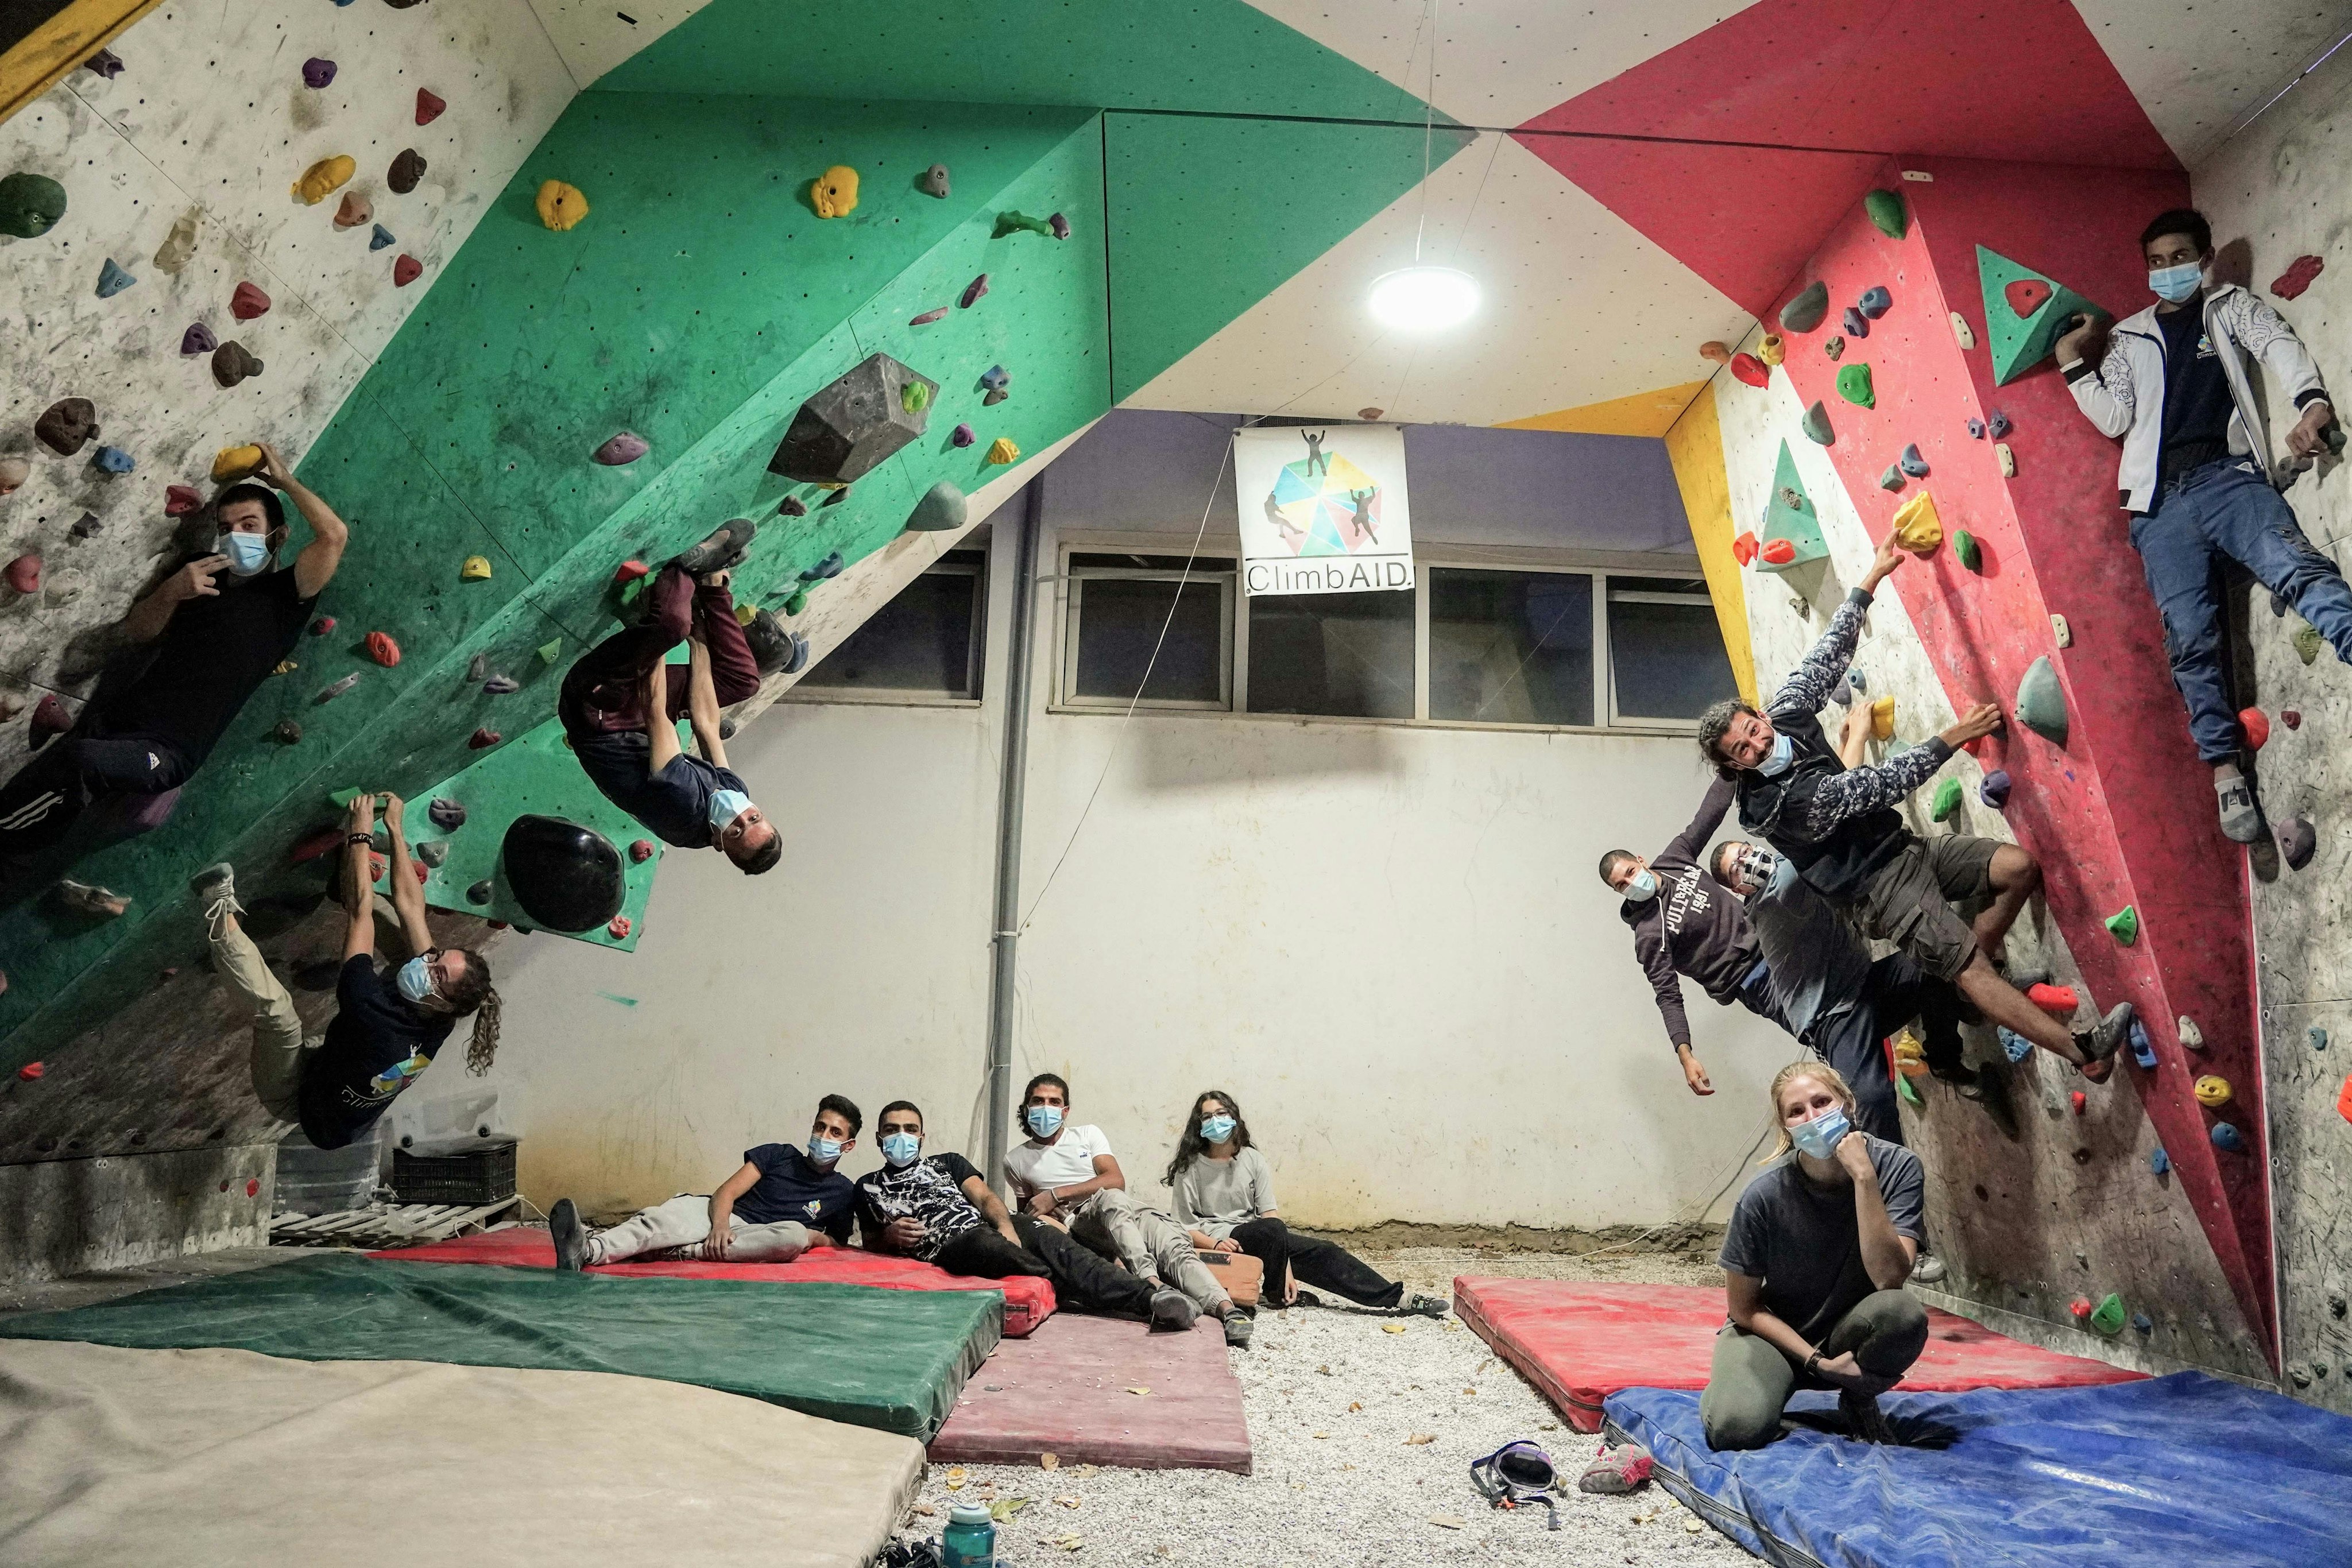 A group photo of people in a bouldering room.